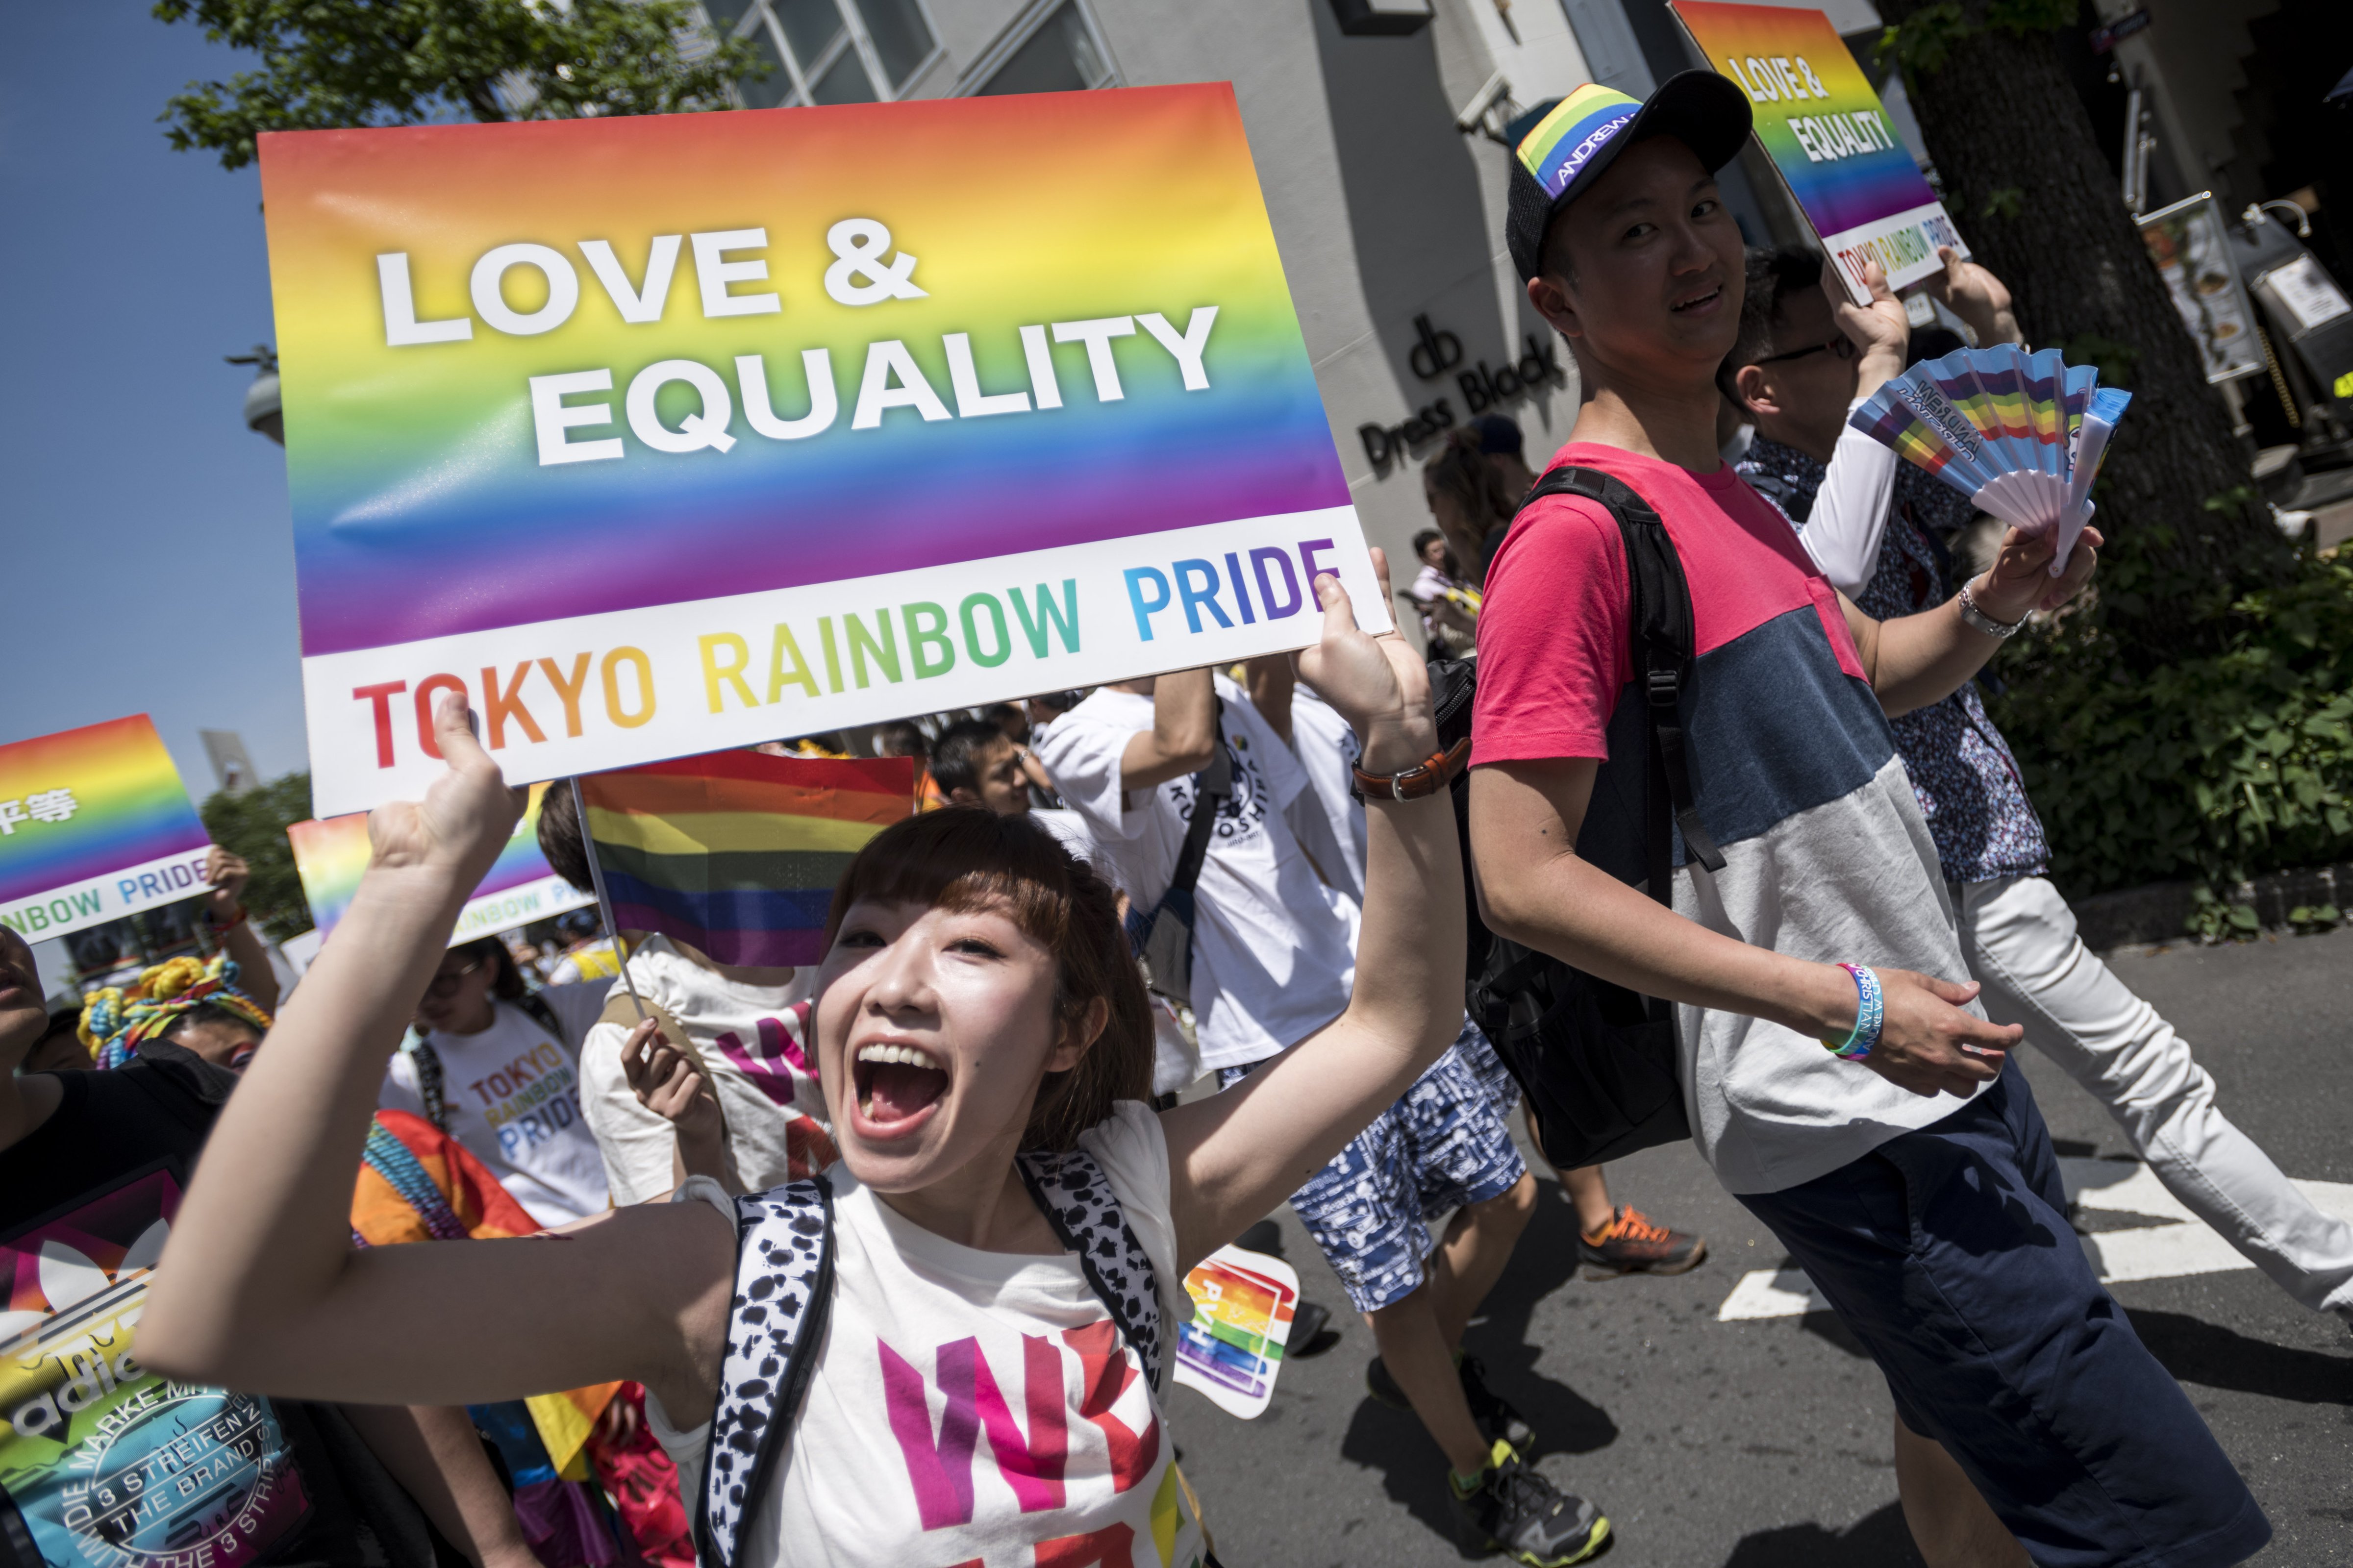 Participants march in the Tokyo Rainbow Pride Parade in Tokyo on May 6, 2018. (Alessandro Di Ciommo—NurPhoto/Getty Images)